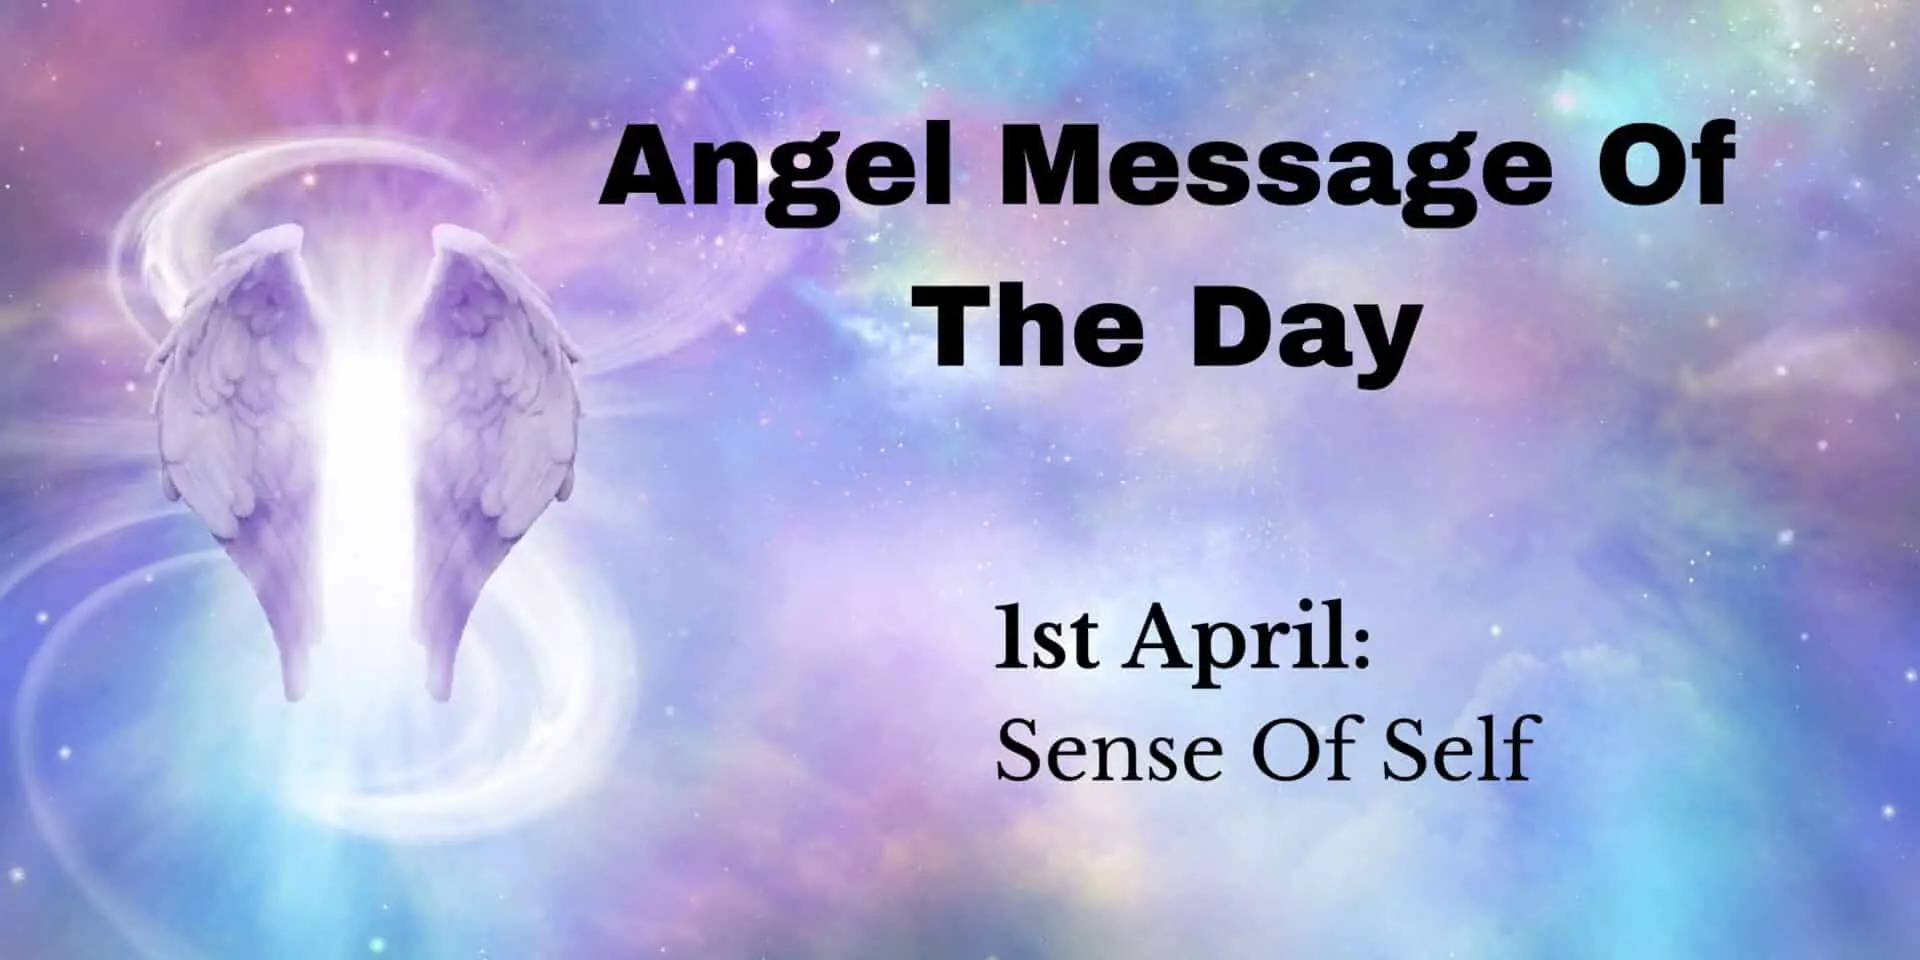 angel message of the day : sense of self